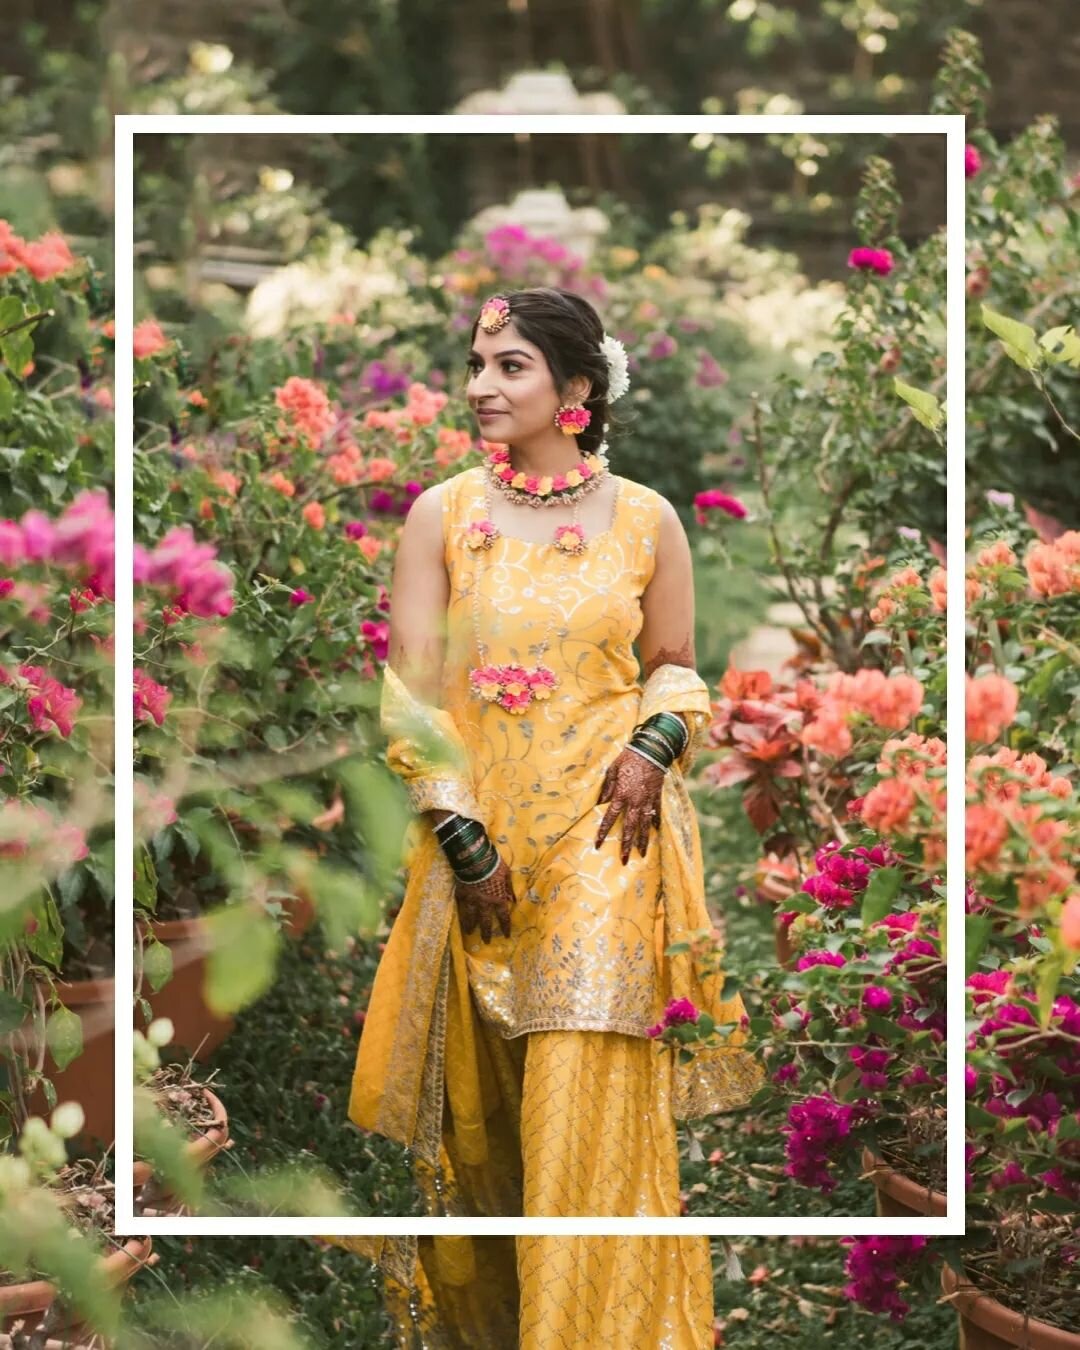 Losing ourselves in a maze of turmeric and laughter, because this love is yellow, bright and oh-so-right! 🌟

Come, step into the vibrant world of Snehal and Umang's haldi fiesta! Snehal's infectious giggle was echoing through the air as she playfull